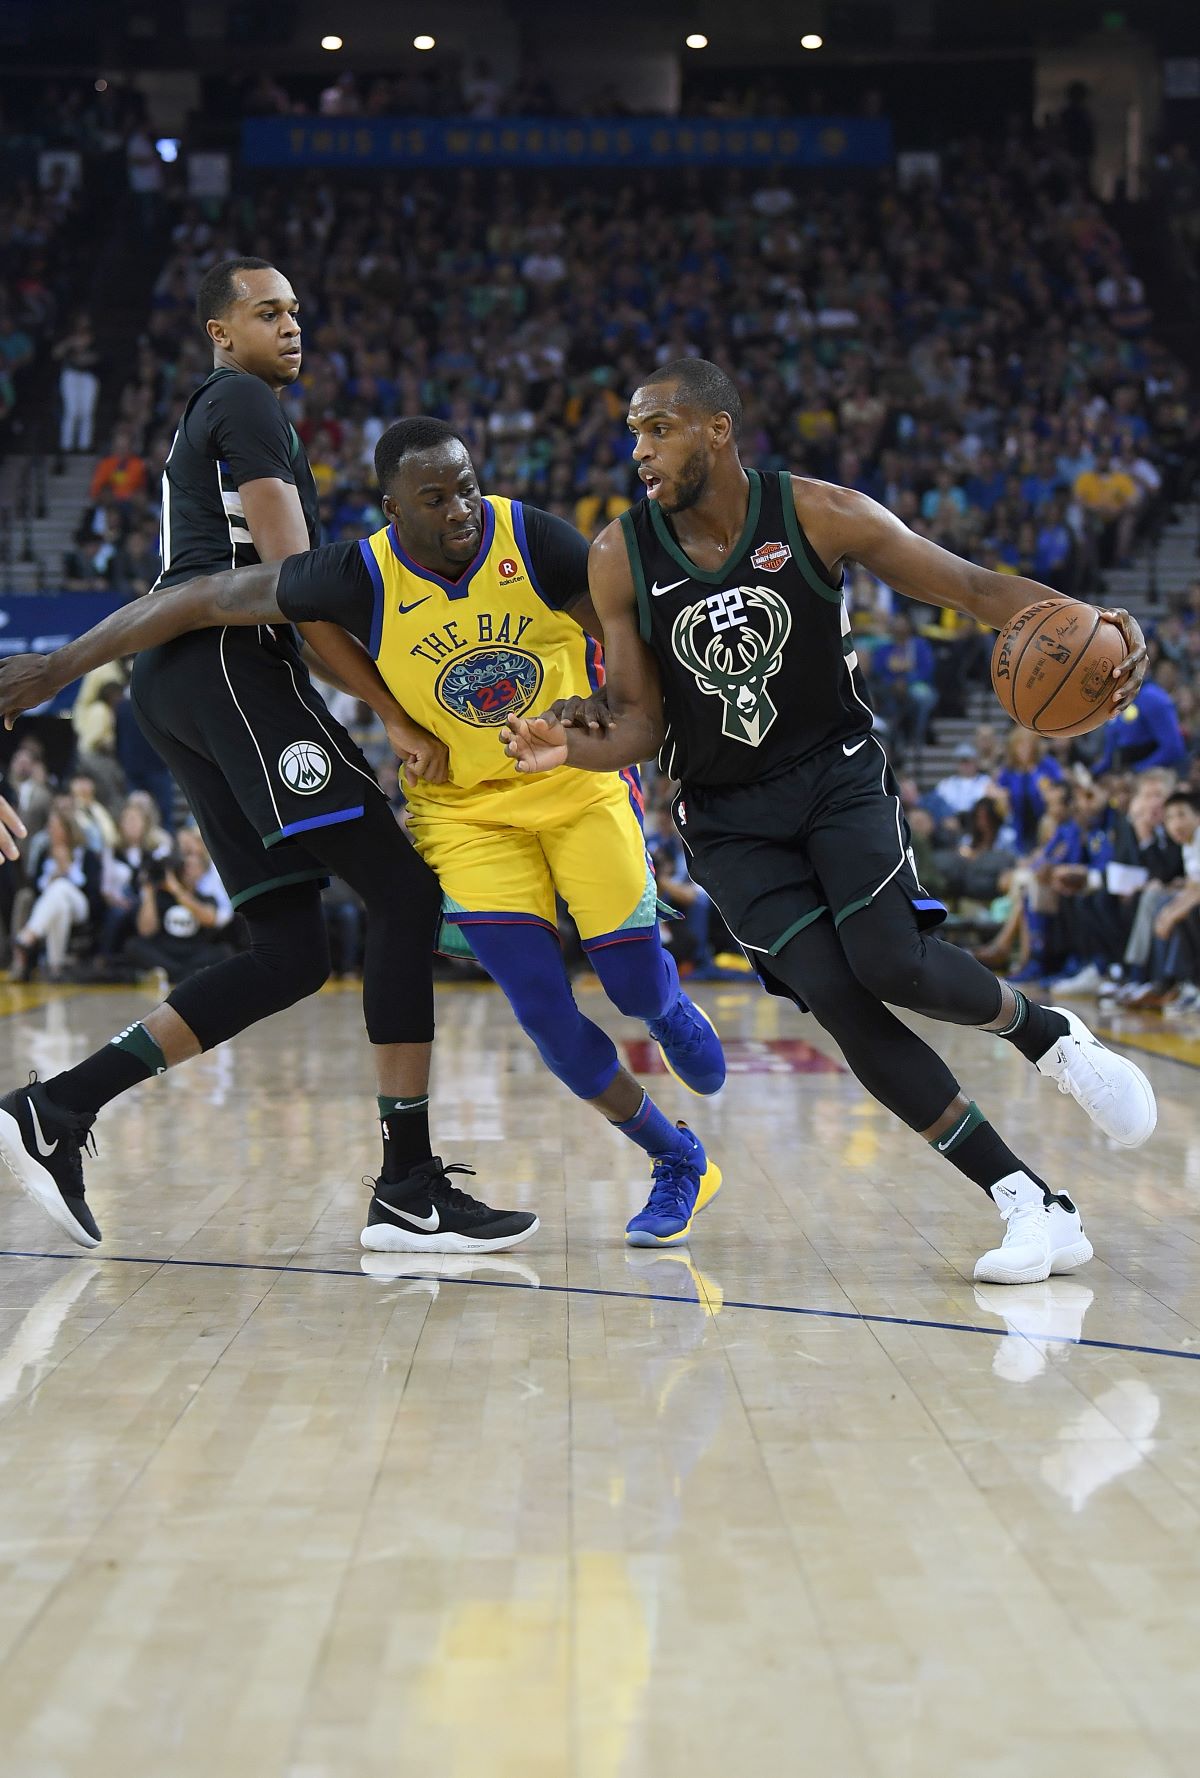 The Milwaukee Bucks' Khris Middleton is guarded by Draymond Green of the Golden State Warriors.